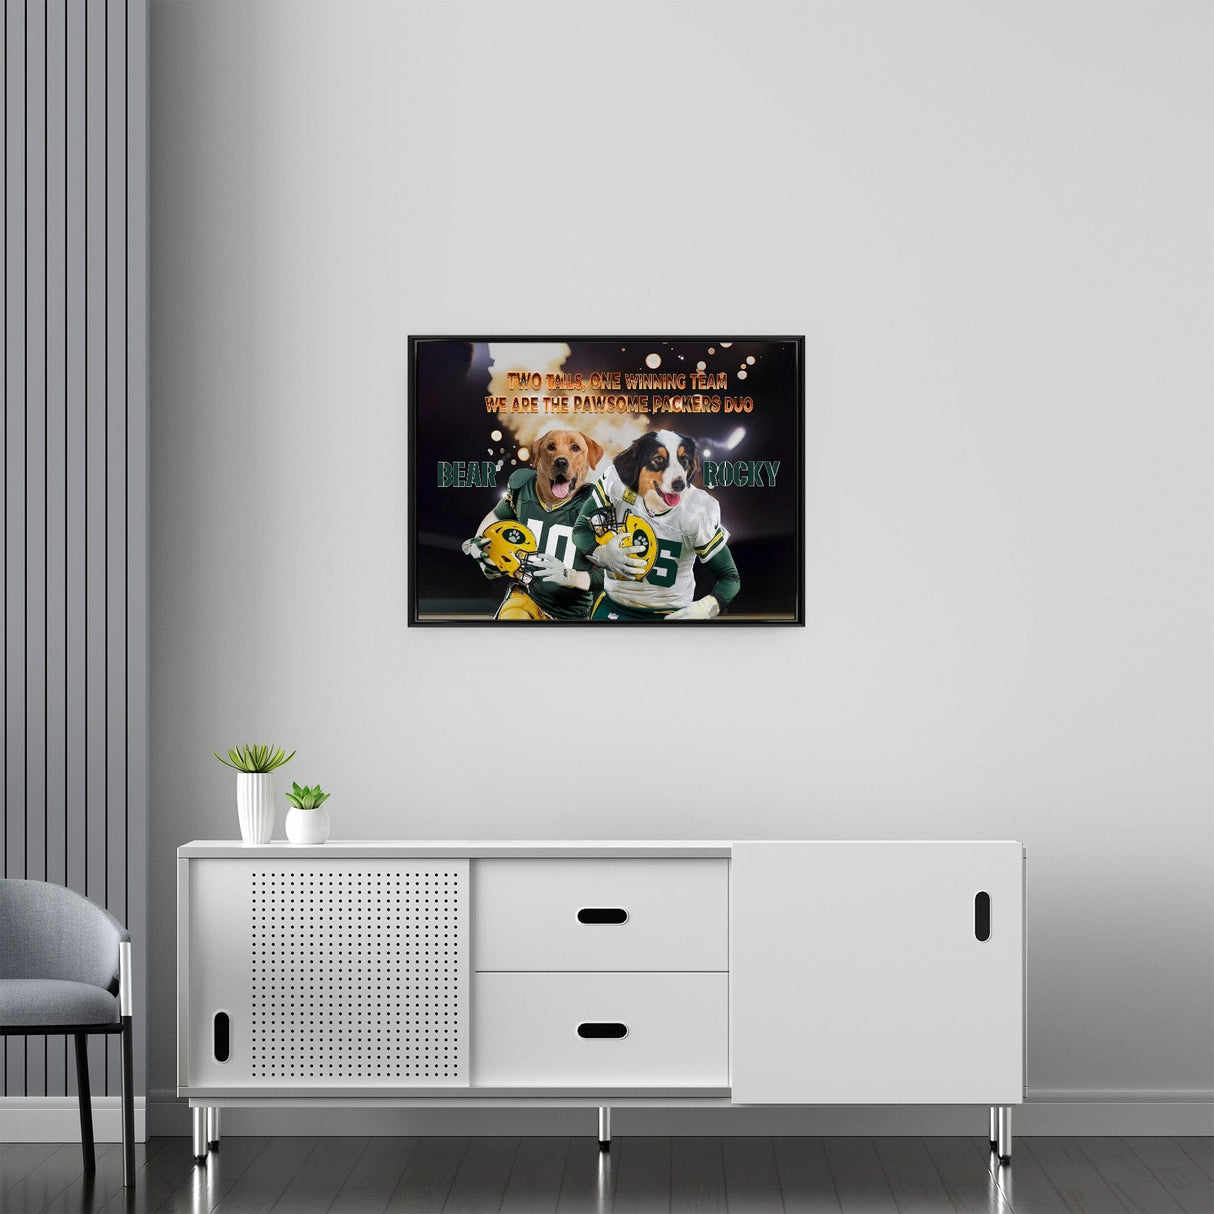 Posters, Prints, & Visual Artwork Dog Lovers - Greenbay Packers 2 Pets Football Canvas - Personalized Pet Poster Canvas Print